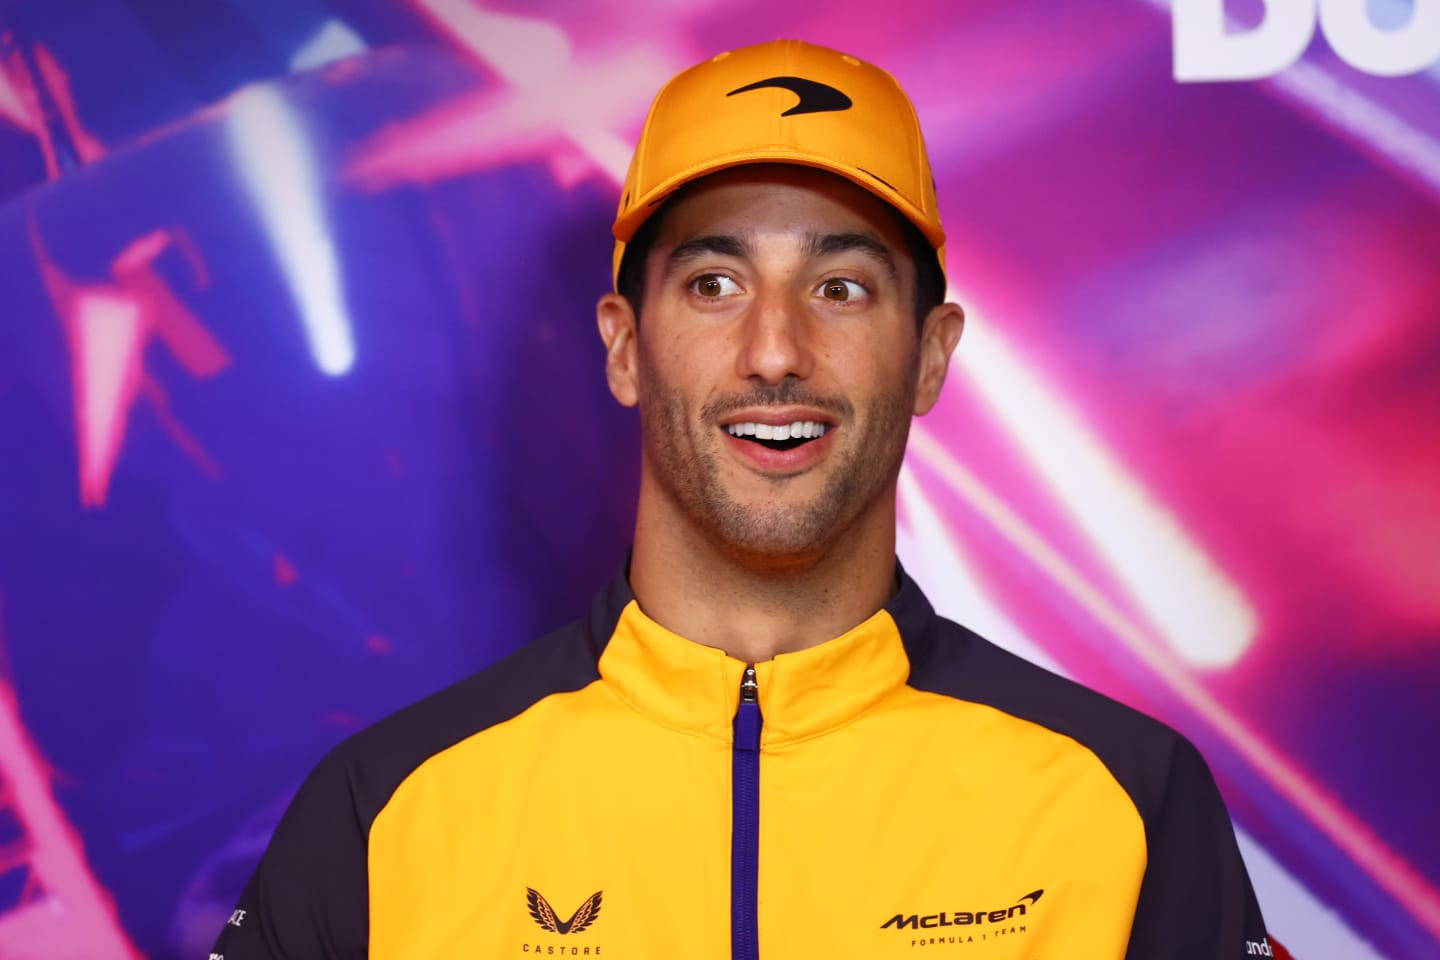 MONTREAL, QUEBEC - JUNE 17: Daniel Ricciardo of Australia and McLaren looks on in the Drivers Press Conference prior to practice ahead of the F1 Grand Prix of Canada at Circuit Gilles Villeneuve on June 17, 2022 in Montreal, Quebec. (Photo by Dan Istitene/Getty Images)